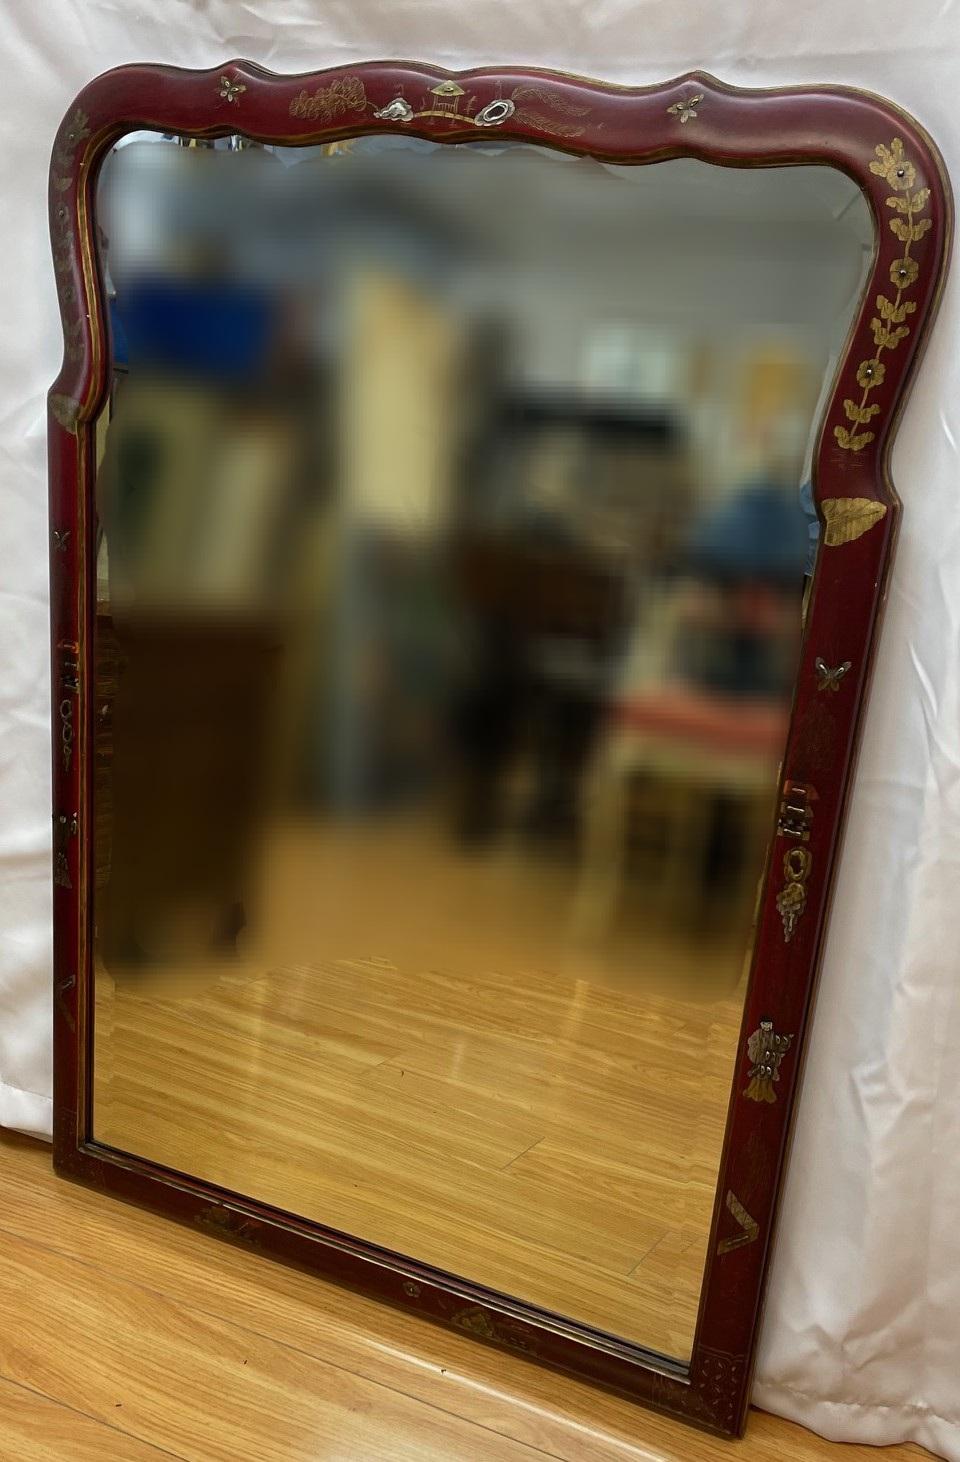 Queen and styled beveled mirror red lacquered in the pagoda style

29x42